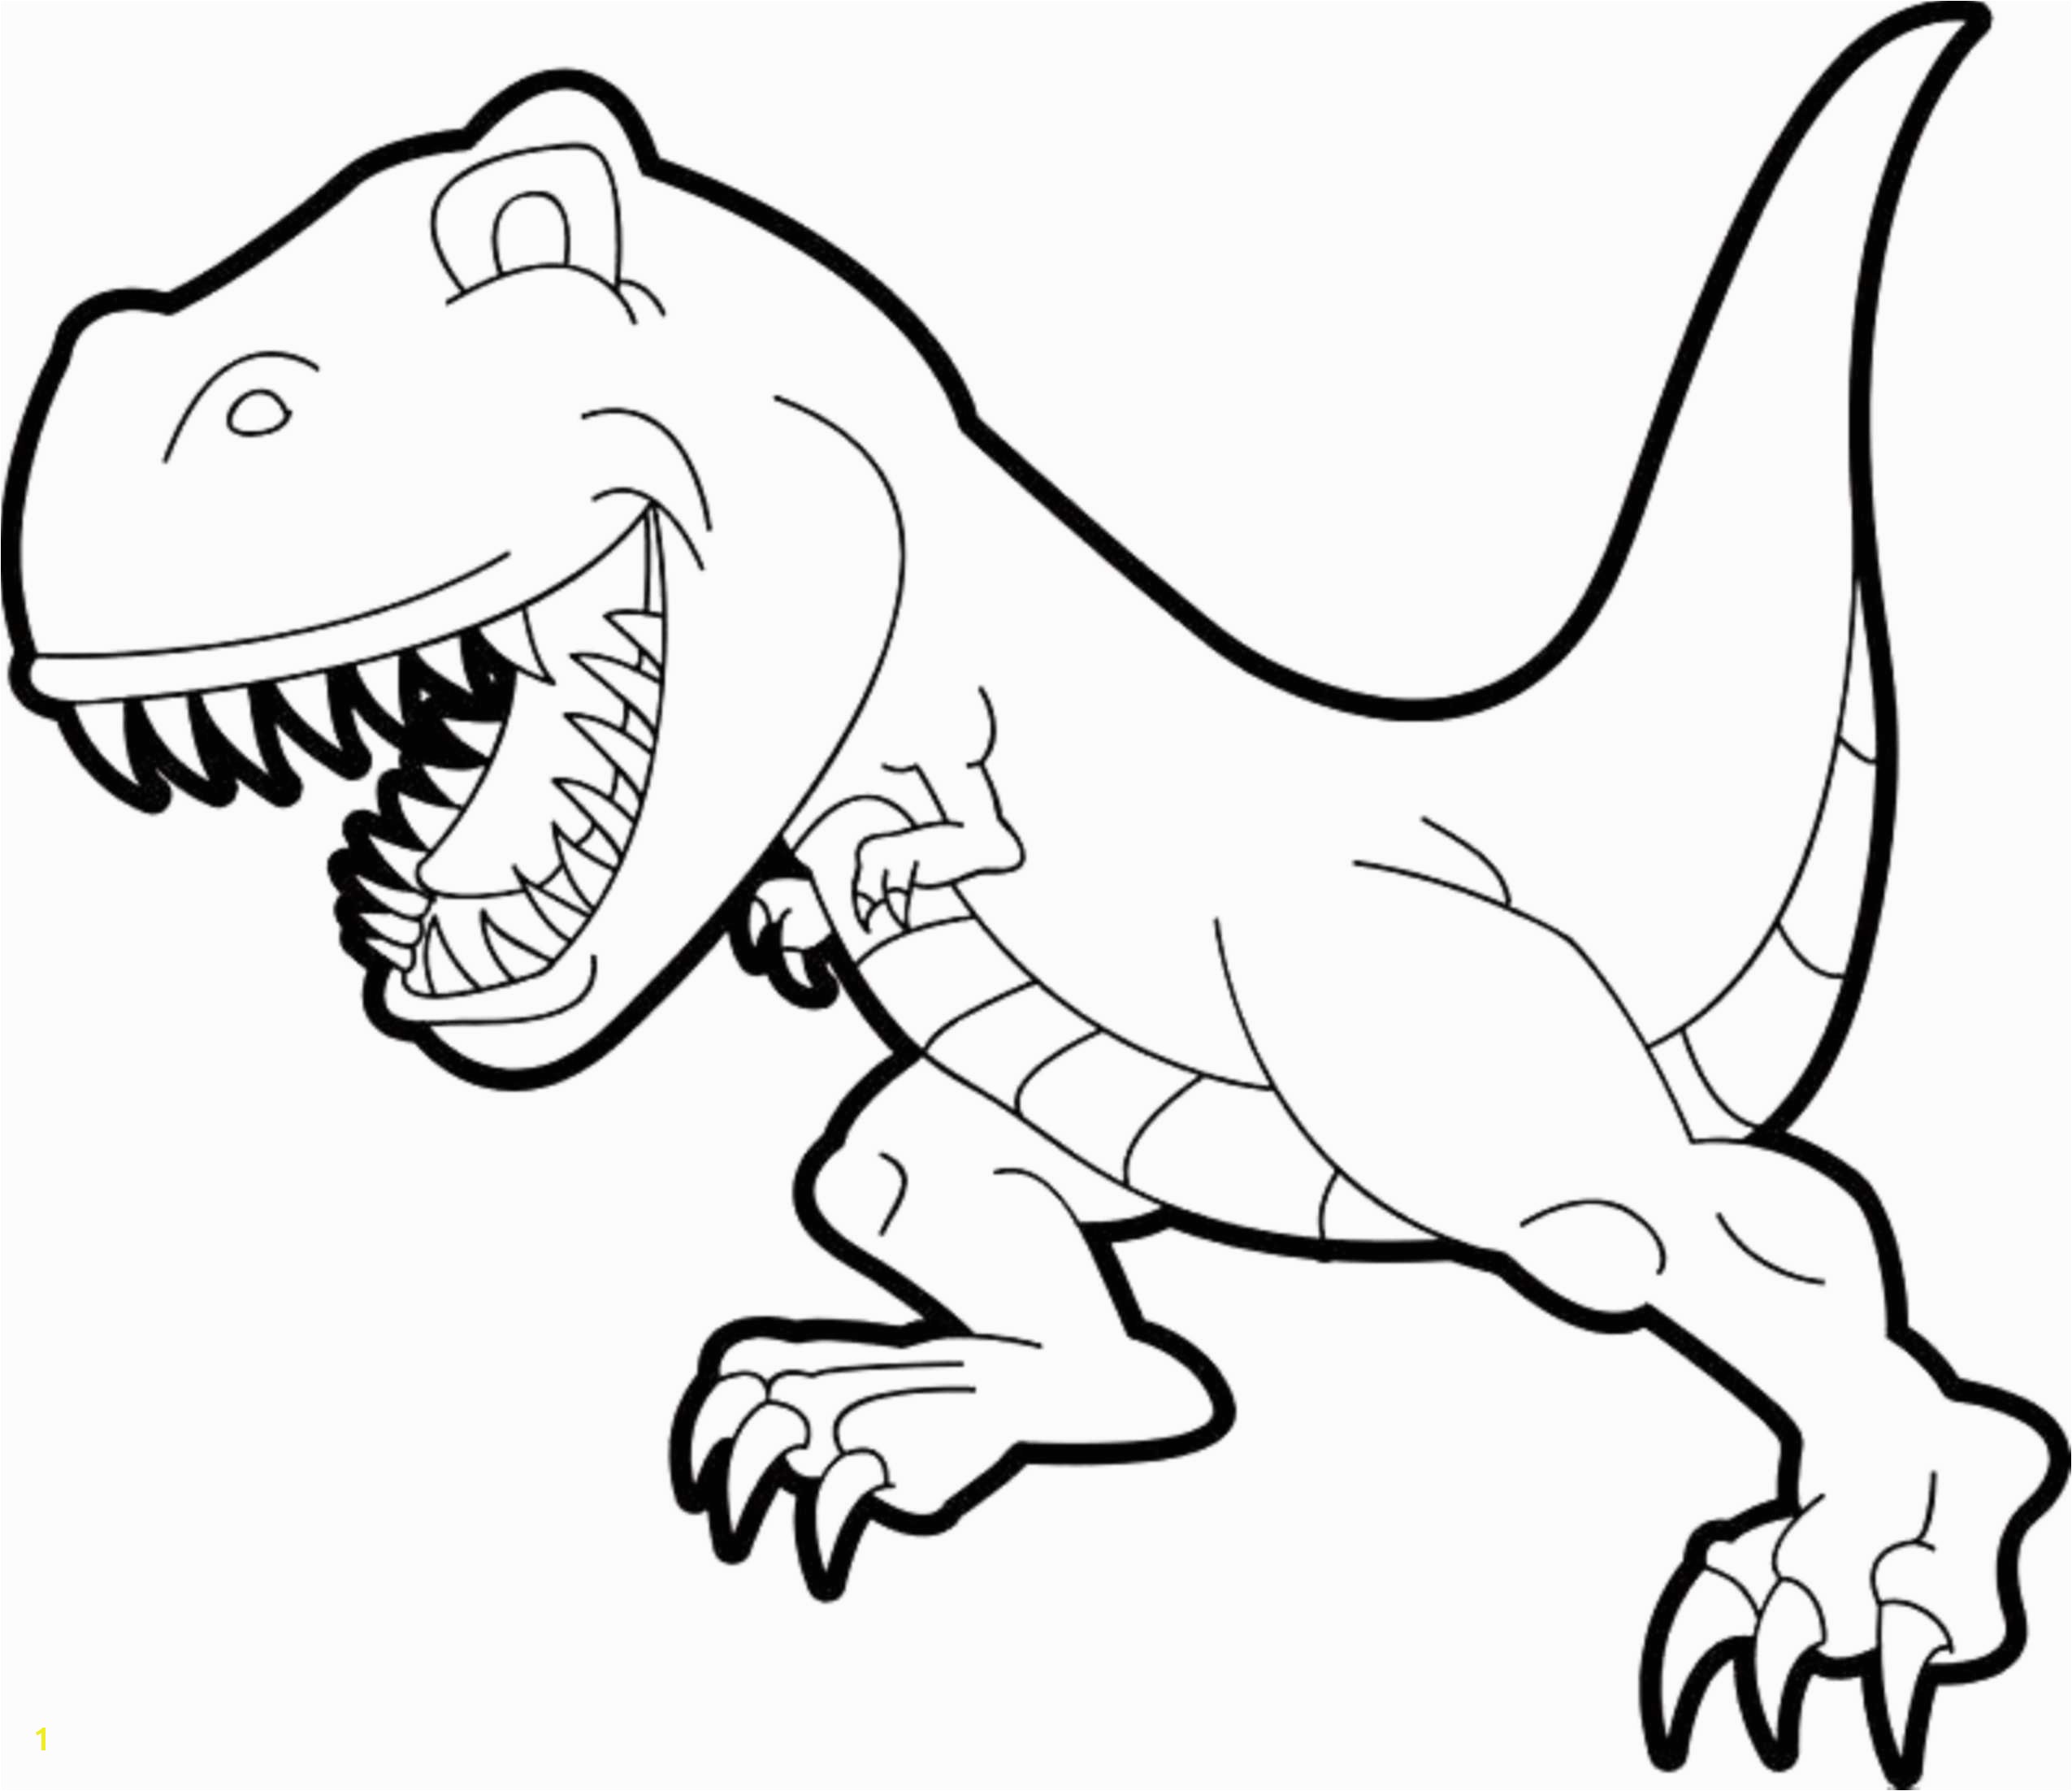 T Rex Coloring Pages to Print T Rex Coloring Page Coloring Pages